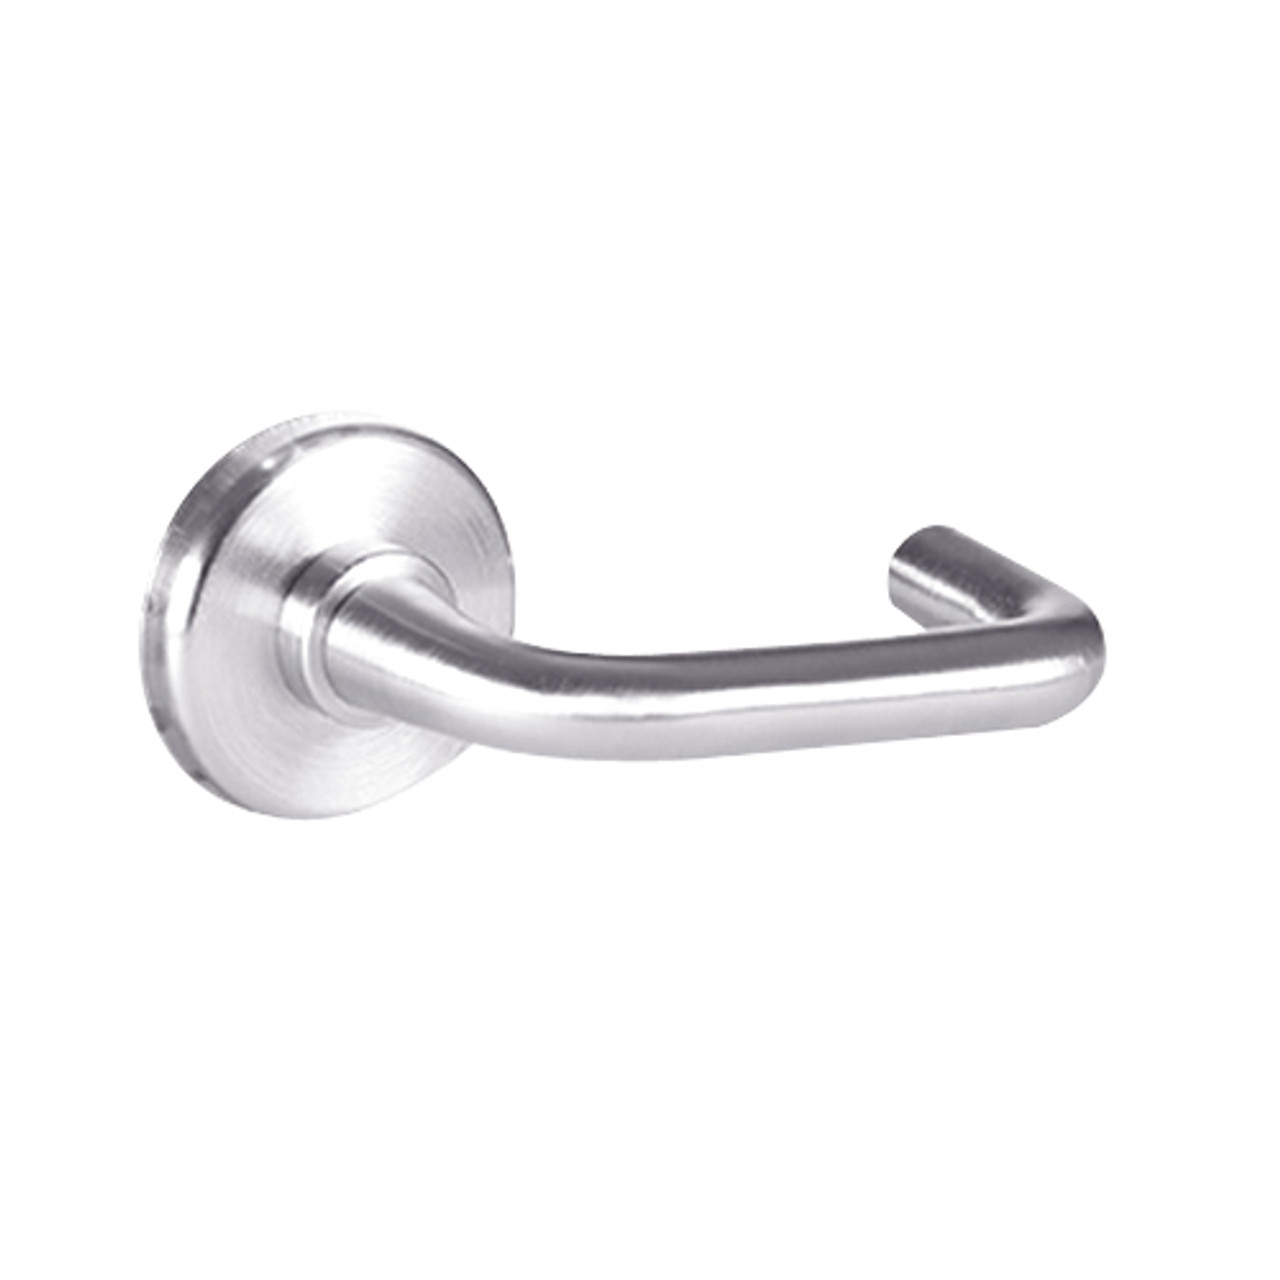 40HTKIS13S629 Best 40H Series Trim Kits Inside Lever Only with Solid Tube-Return Trim Style in Bright Stainless Steel